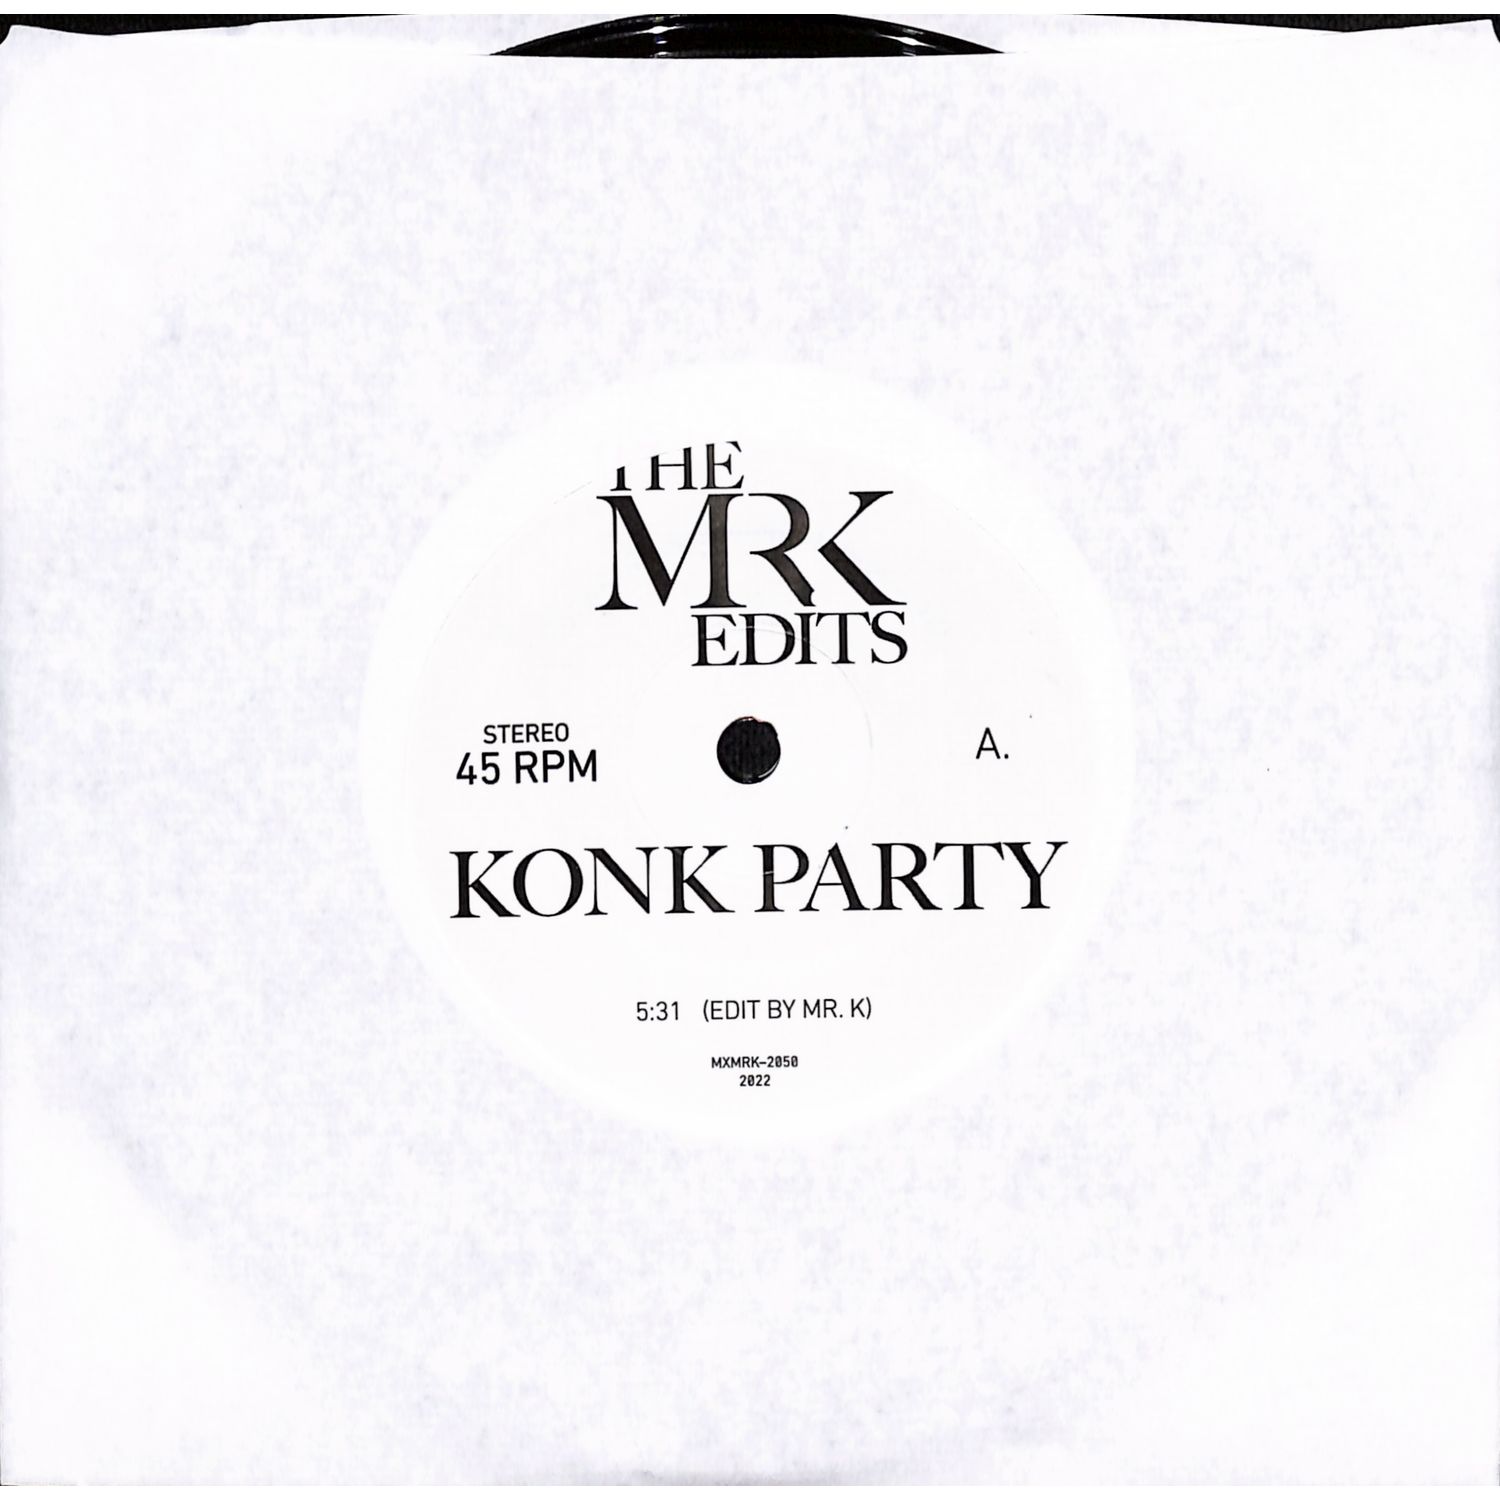 Mr K Edits - KONK PARTY / HOLD ON TO YOUR MIND 